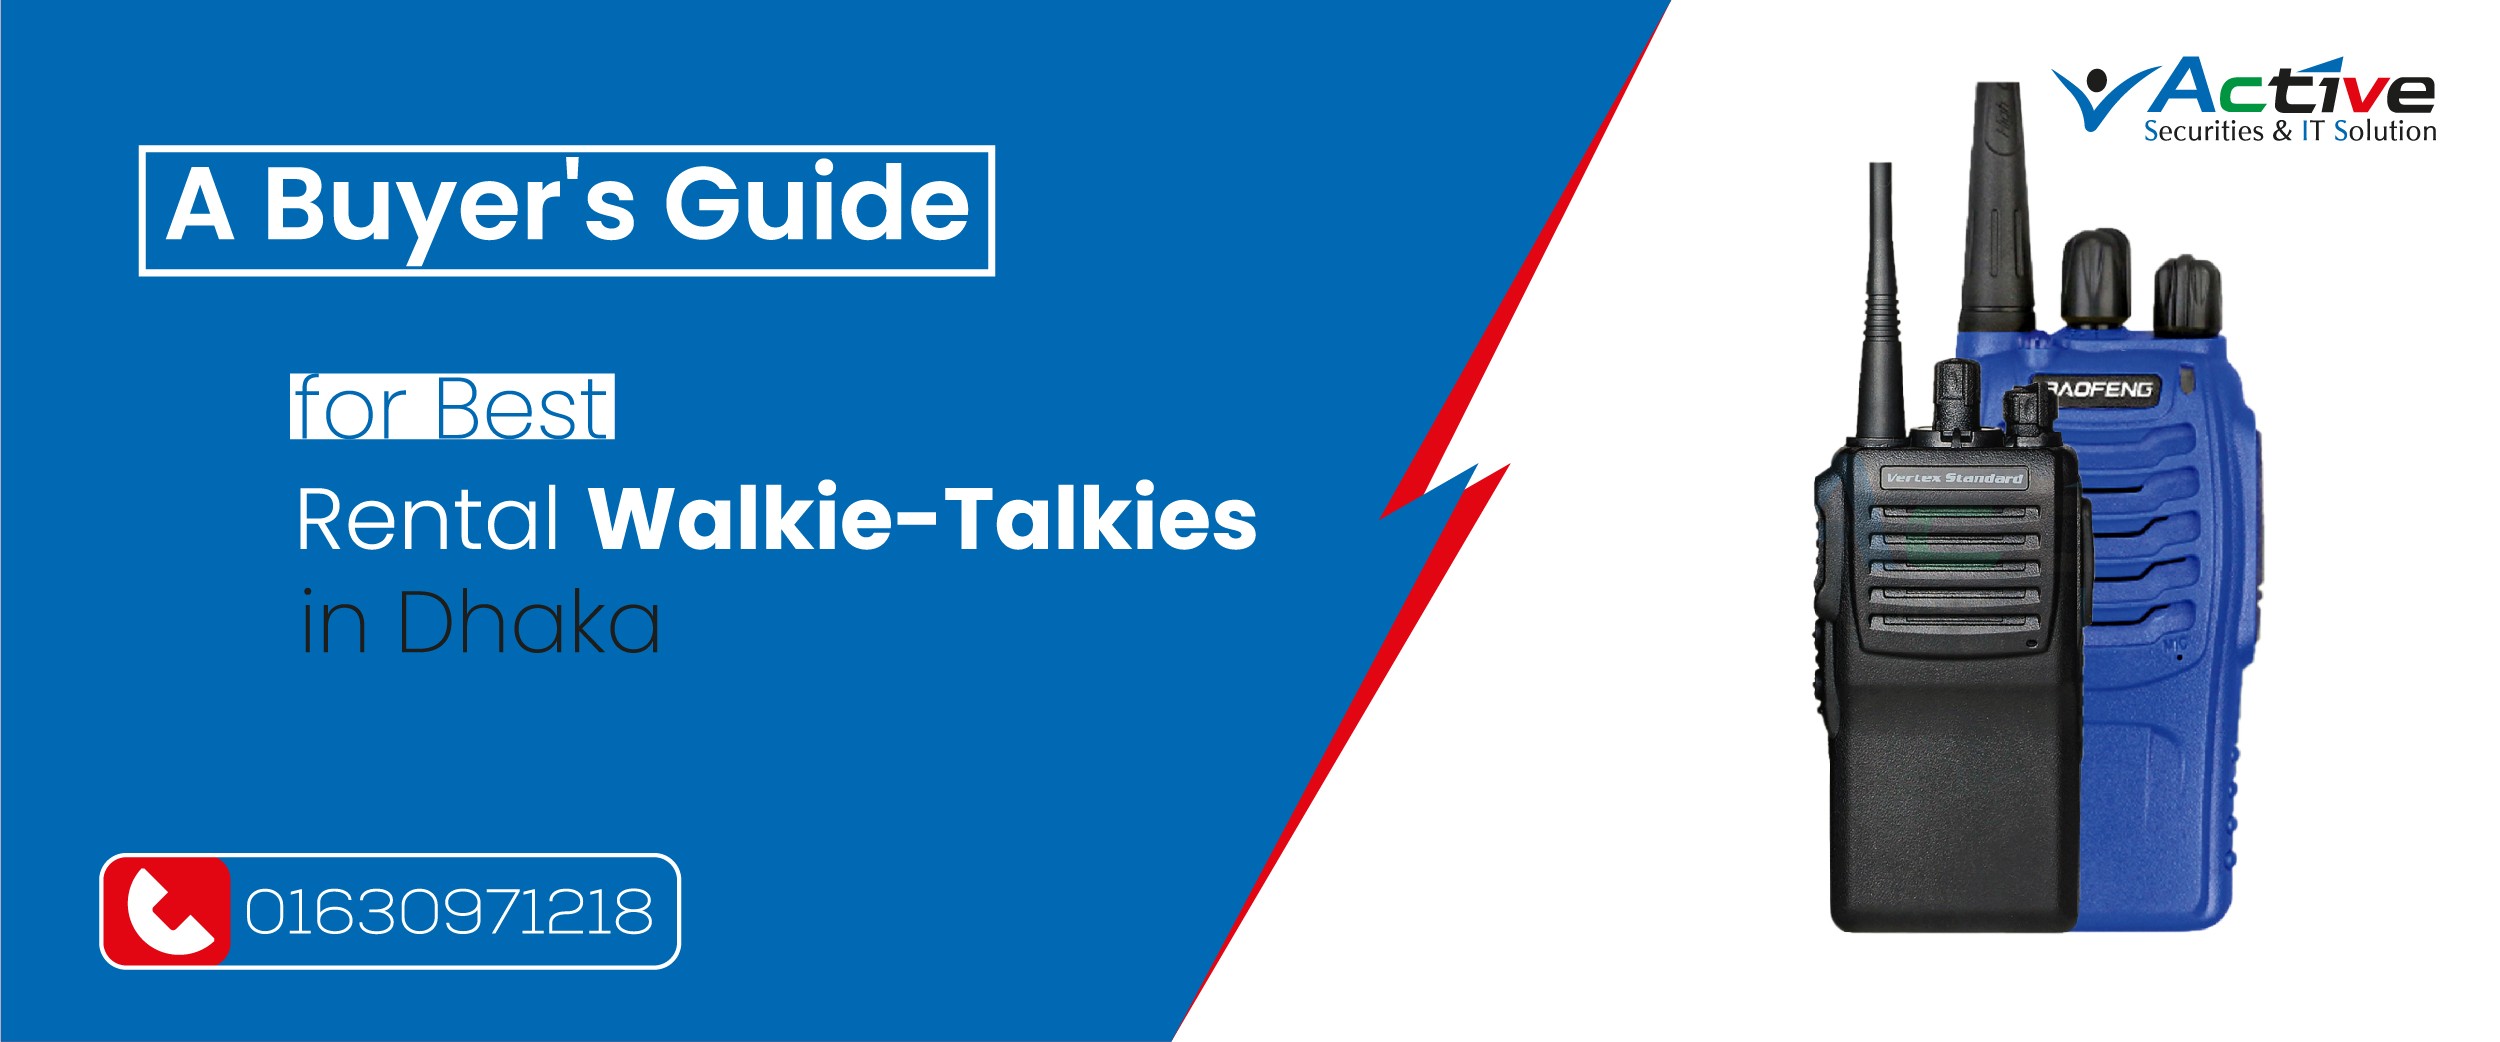 A Buyer's Guide for Best Rental Walkie-Talkies in Dhaka | Authorized Supplier